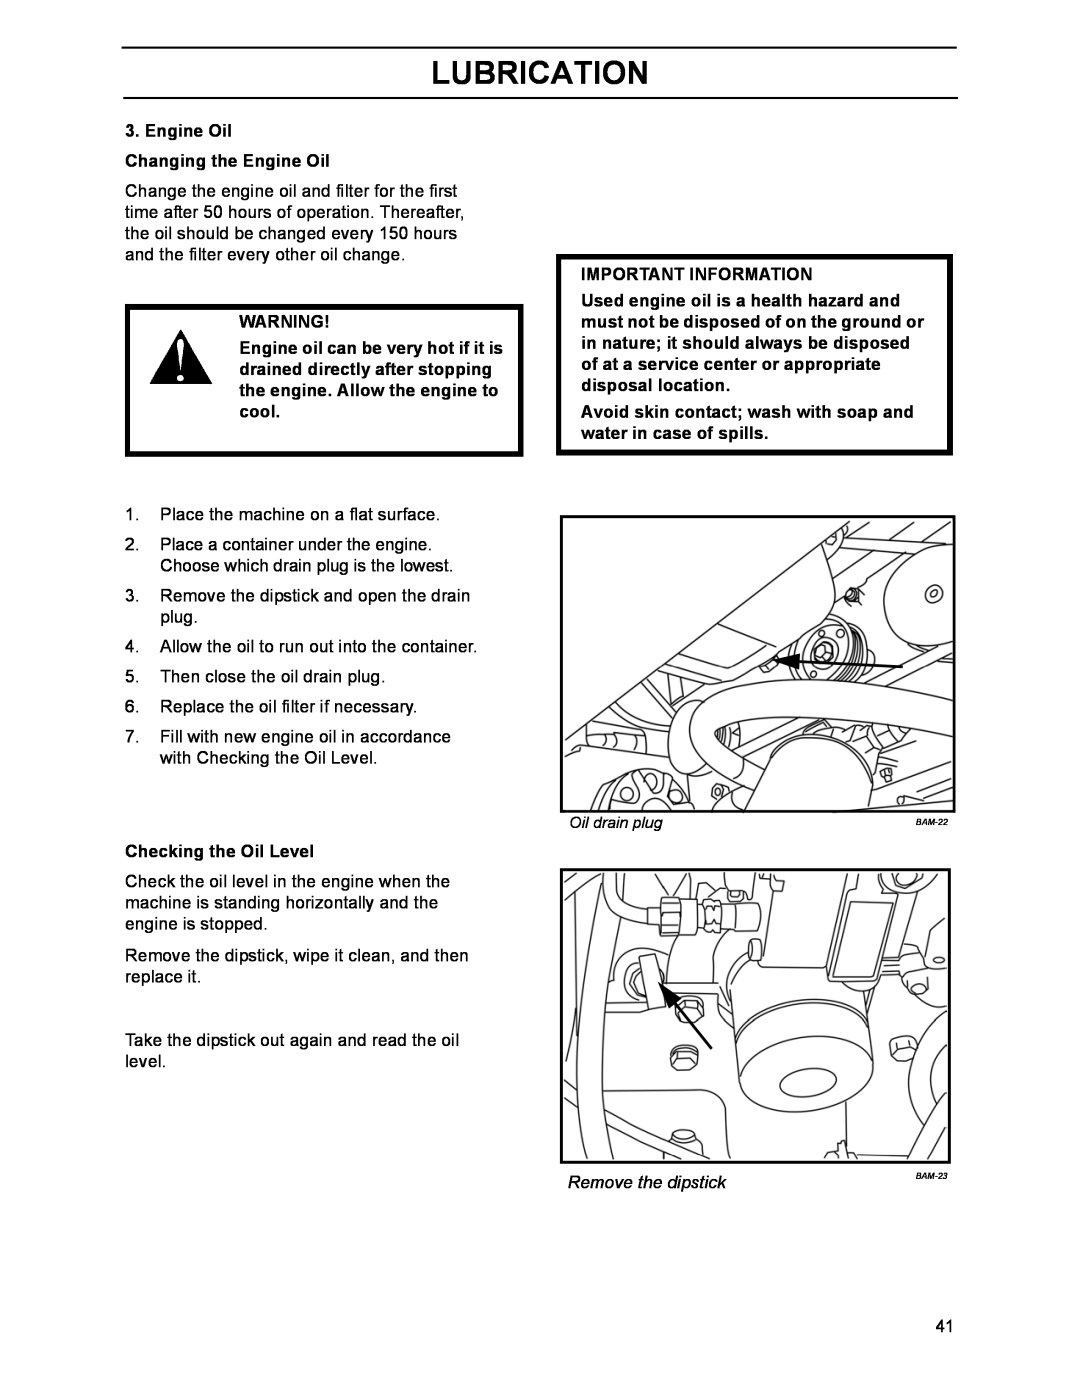 Husqvarna 968999214 manual Lubrication, Engine Oil Changing the Engine Oil, Checking the Oil Level, Important Information 